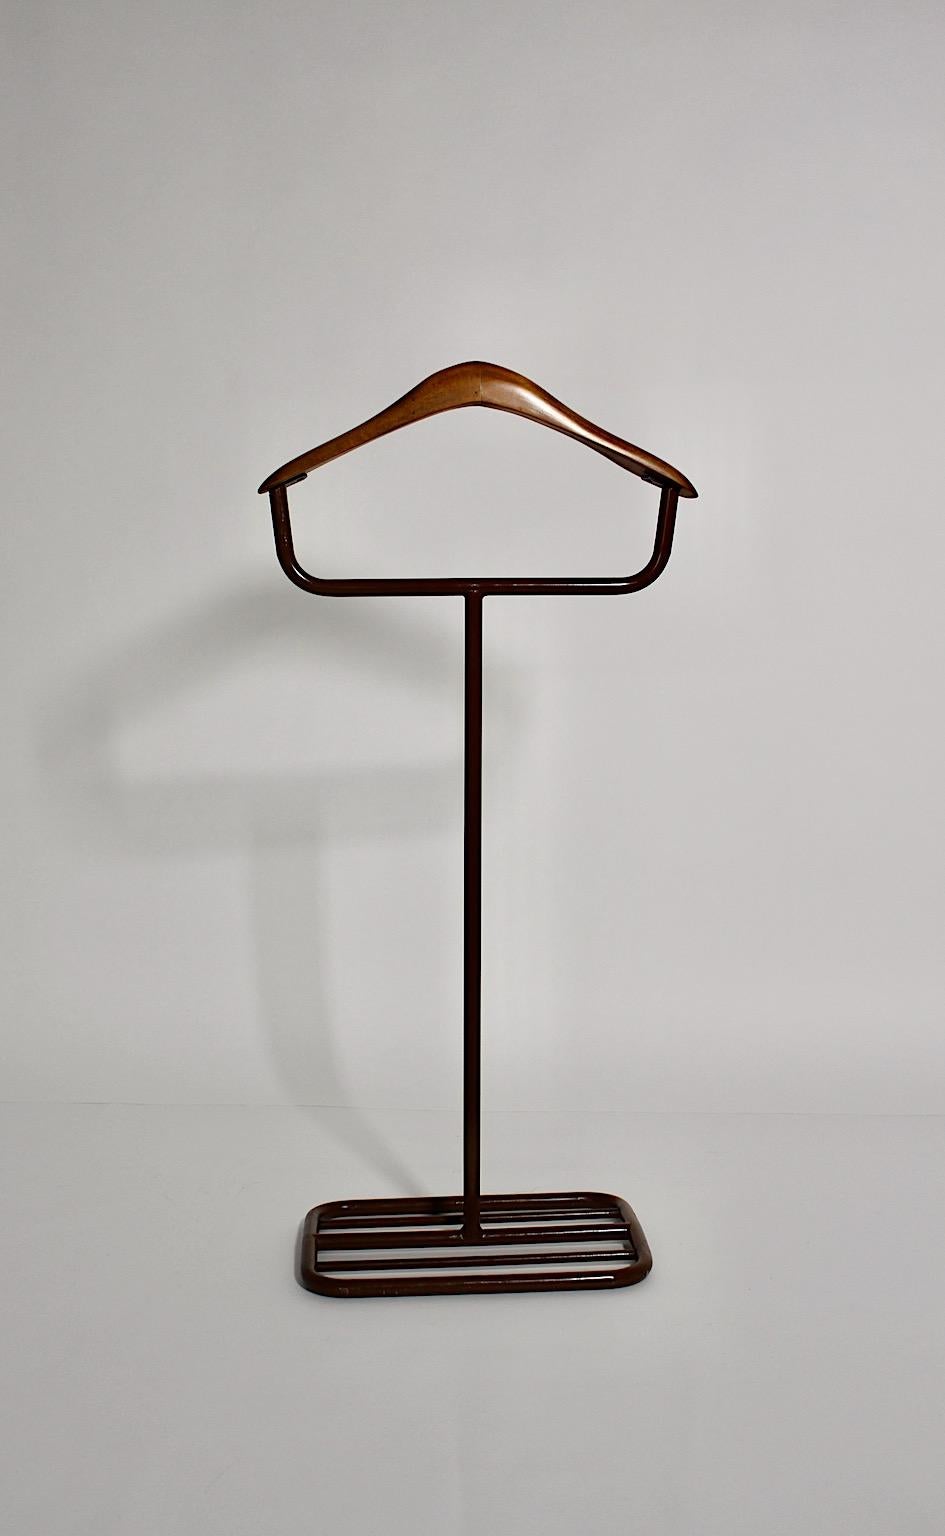 Bauhaus vintage valet or coat rack from lacquered tube steel and beech in brown color circa 1930 Germany.
A sleek and uncluttered valet or coat rack from lacquered metal and beech designed and made circa 1930 Germany.
Throughout its plain look and